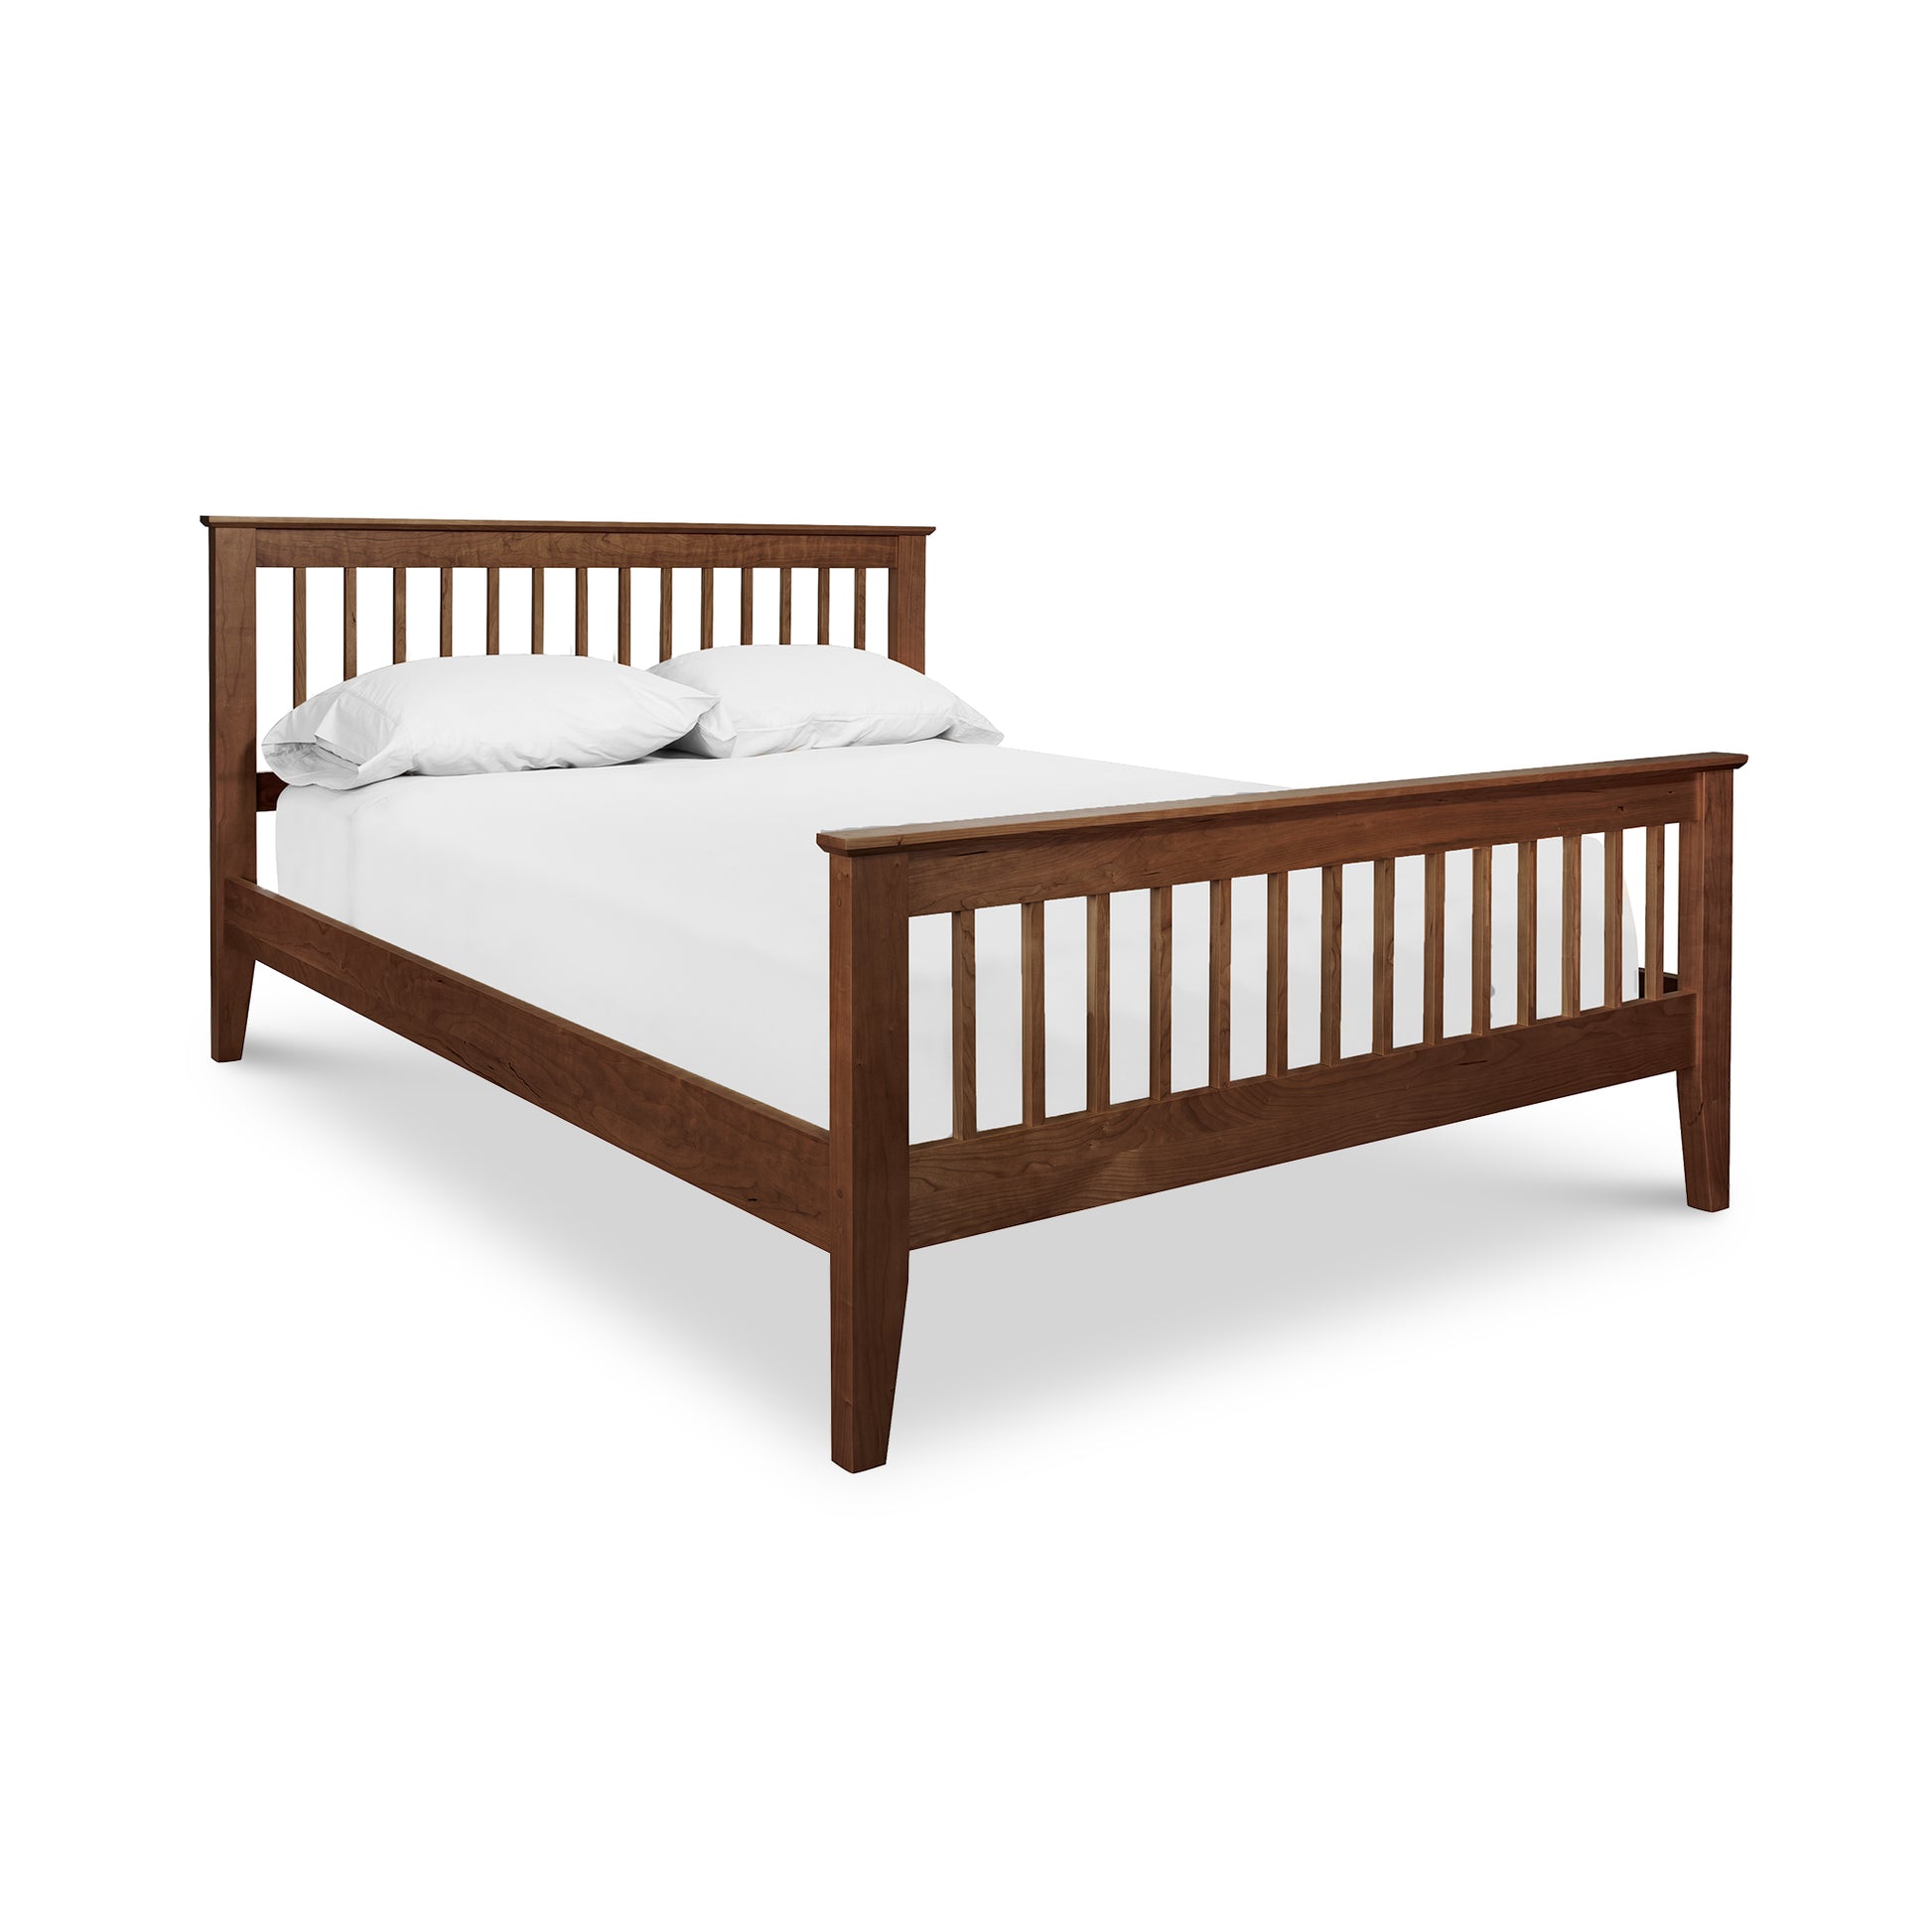 A high-quality Lyndon Furniture American Mission Bed with a white sheet on it.